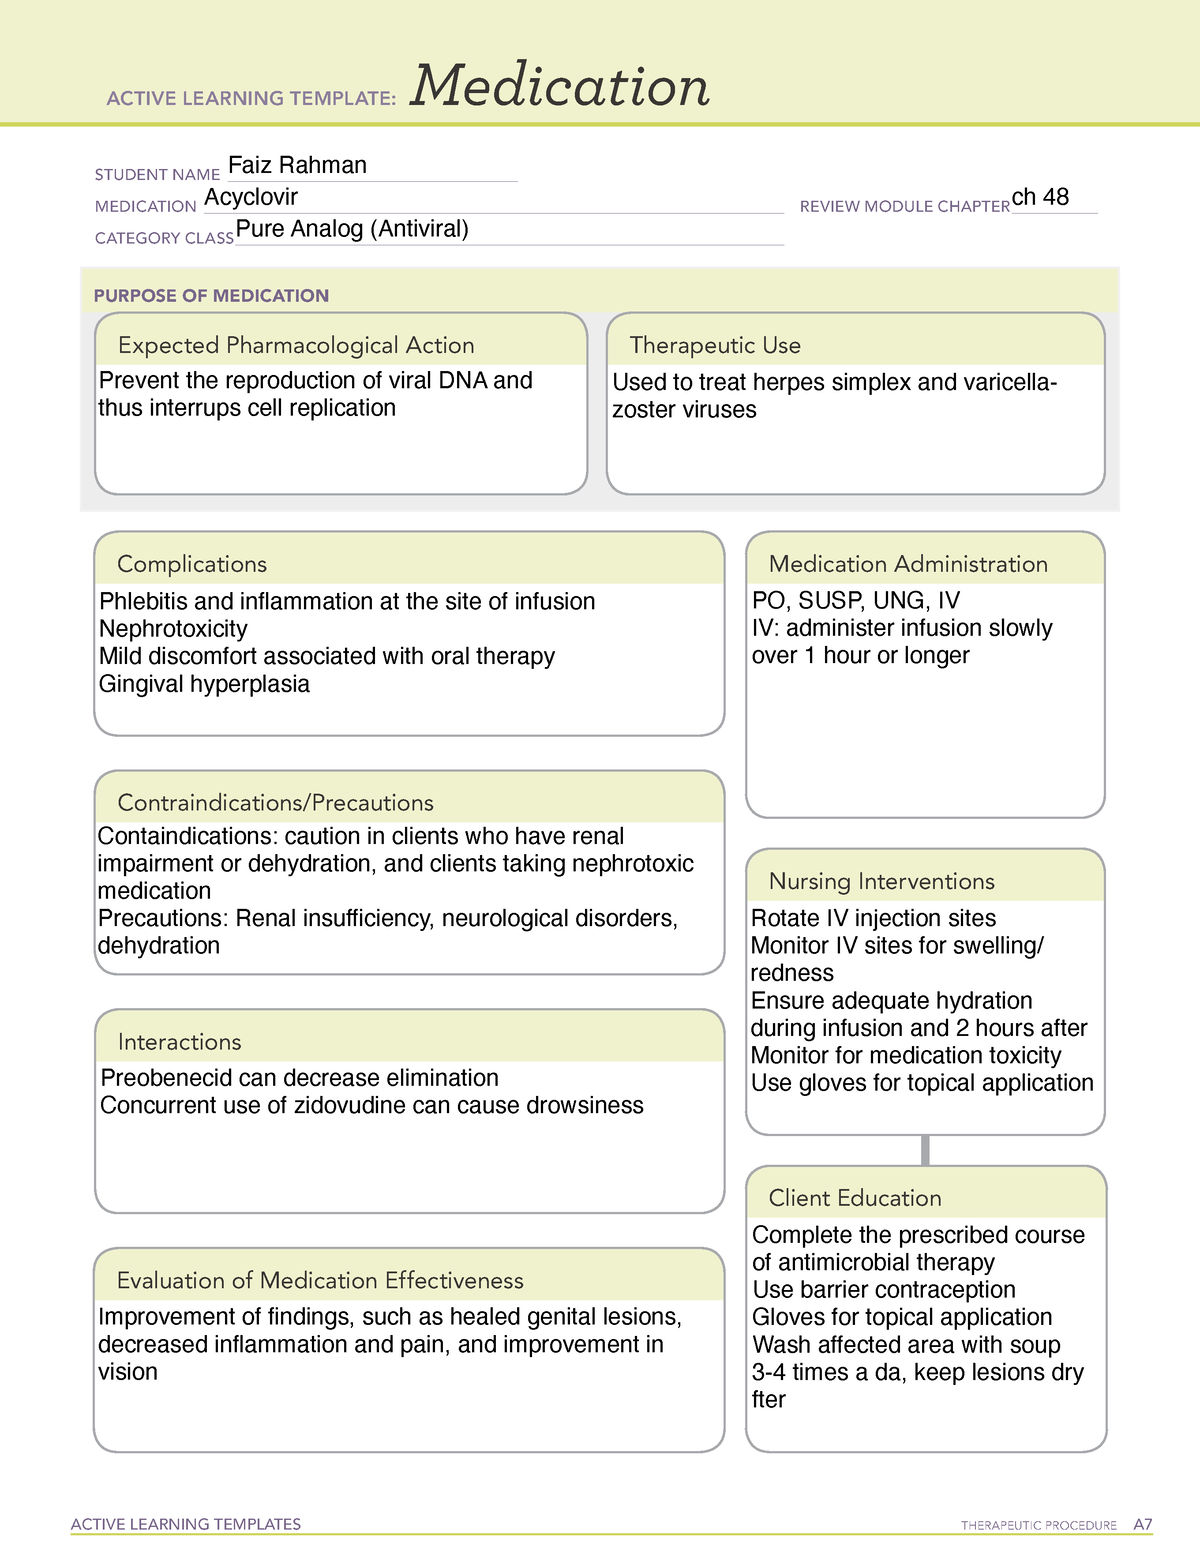 Acyclovir Drug template ACTIVE LEARNING TEMPLATES THERAPEUTIC